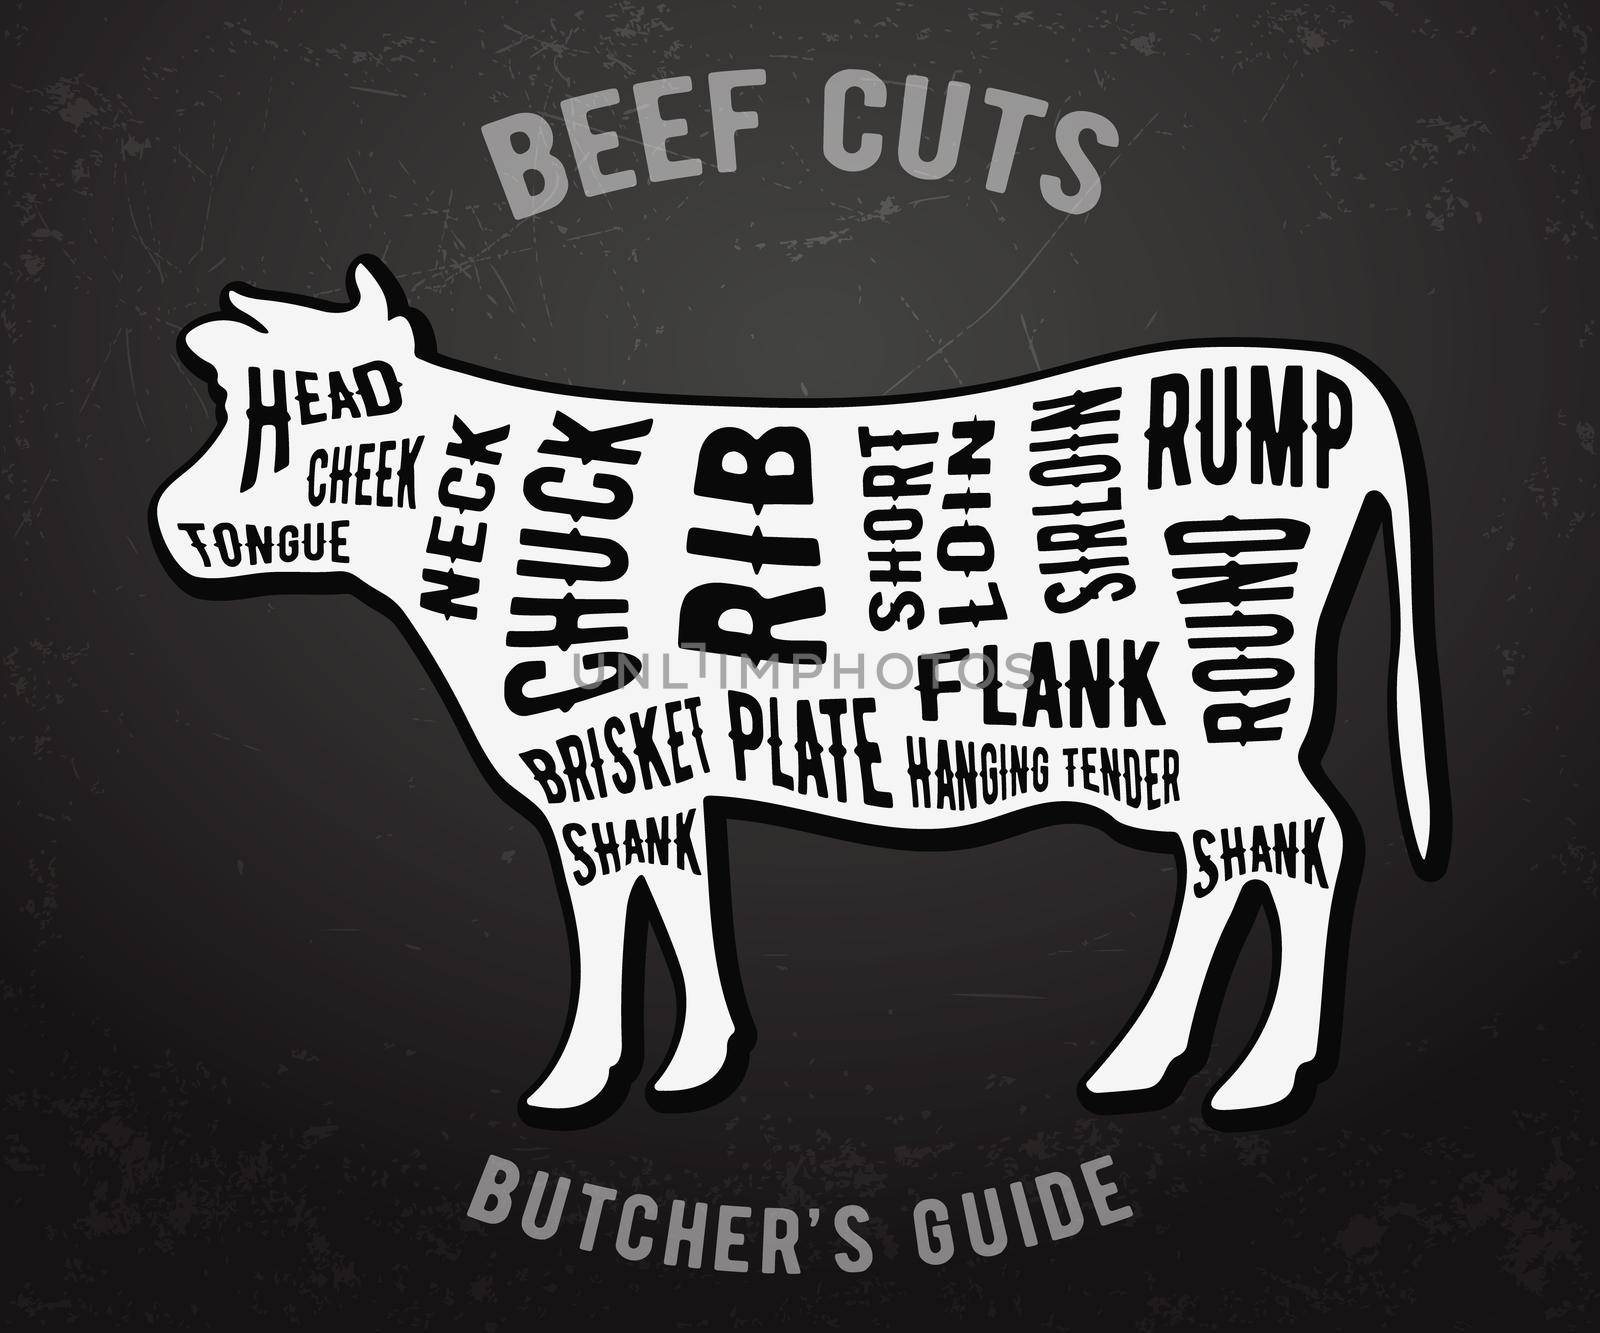 Butcher guide beef cuts by Bobnevv